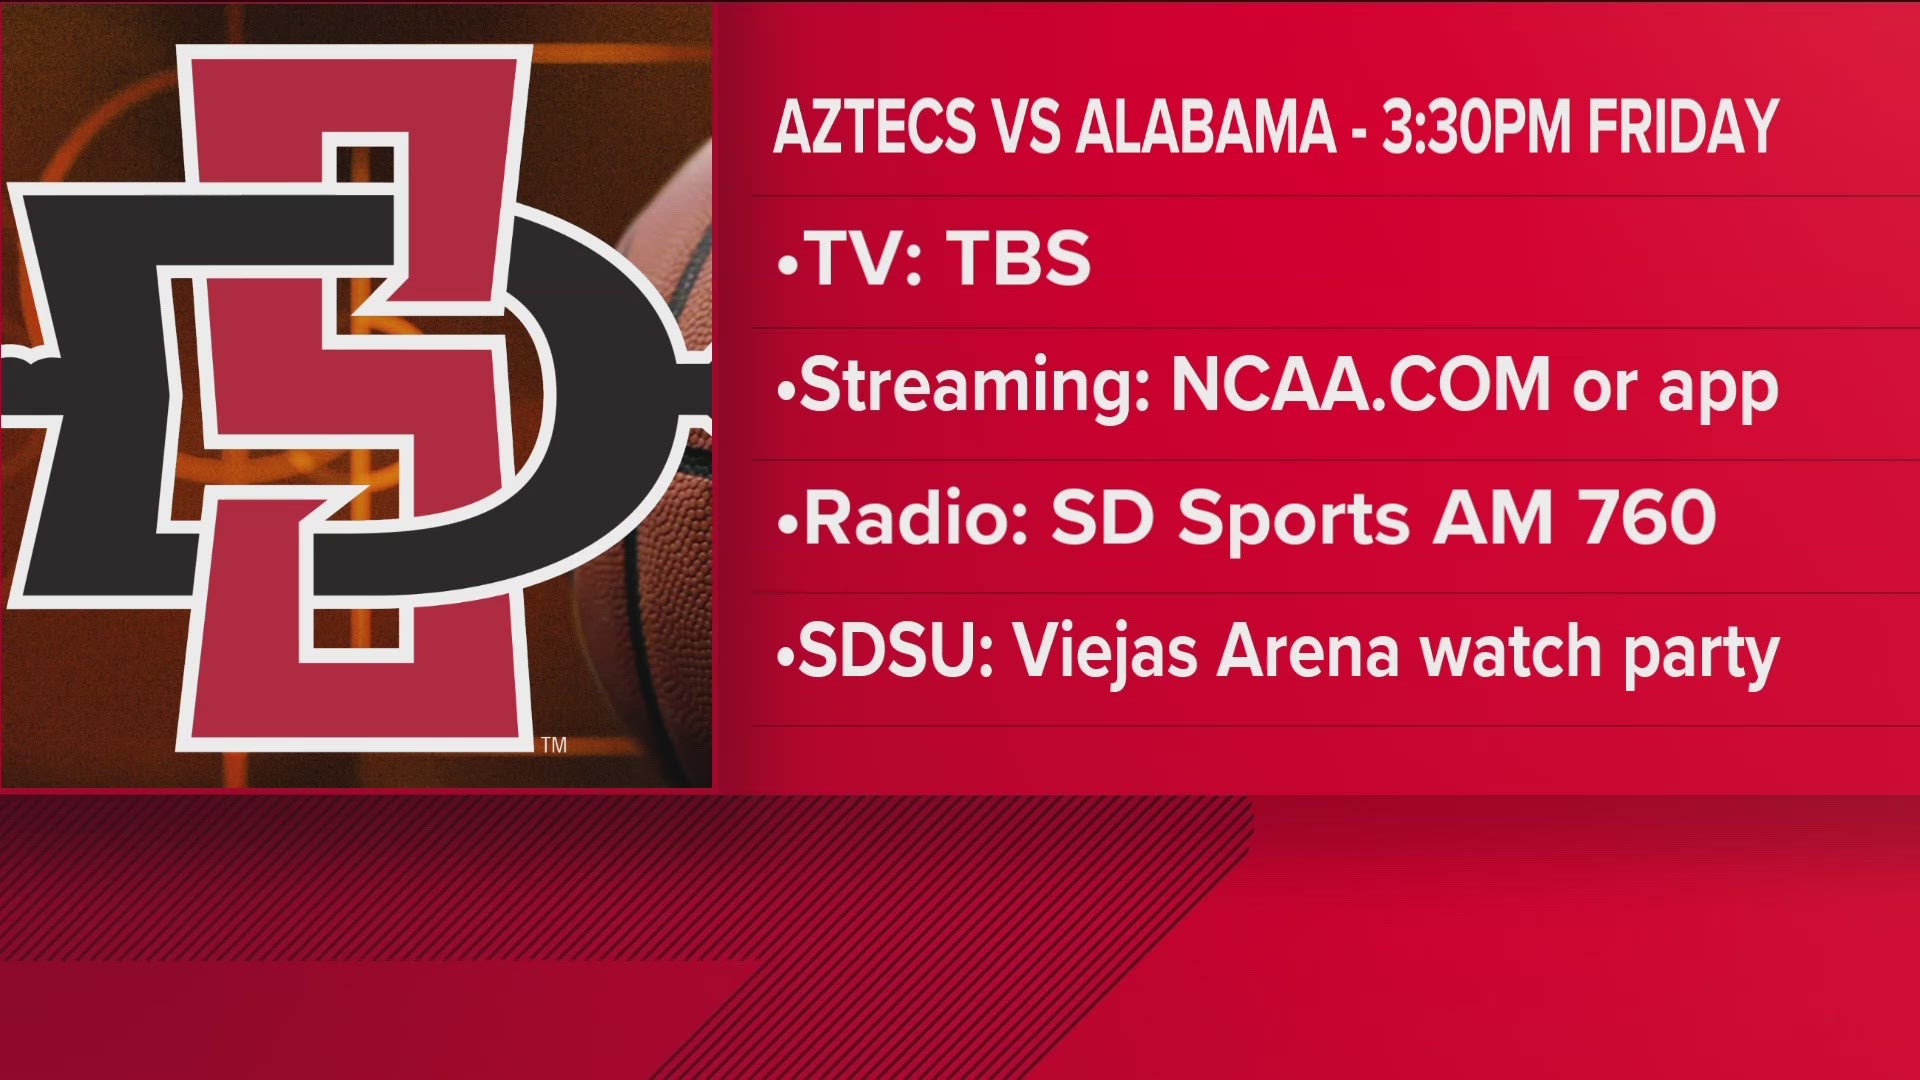 No. 5 San Diego State Aztecs faces off against No. 1 Alabama Crimson Tide in the Sweet 16 on Friday.